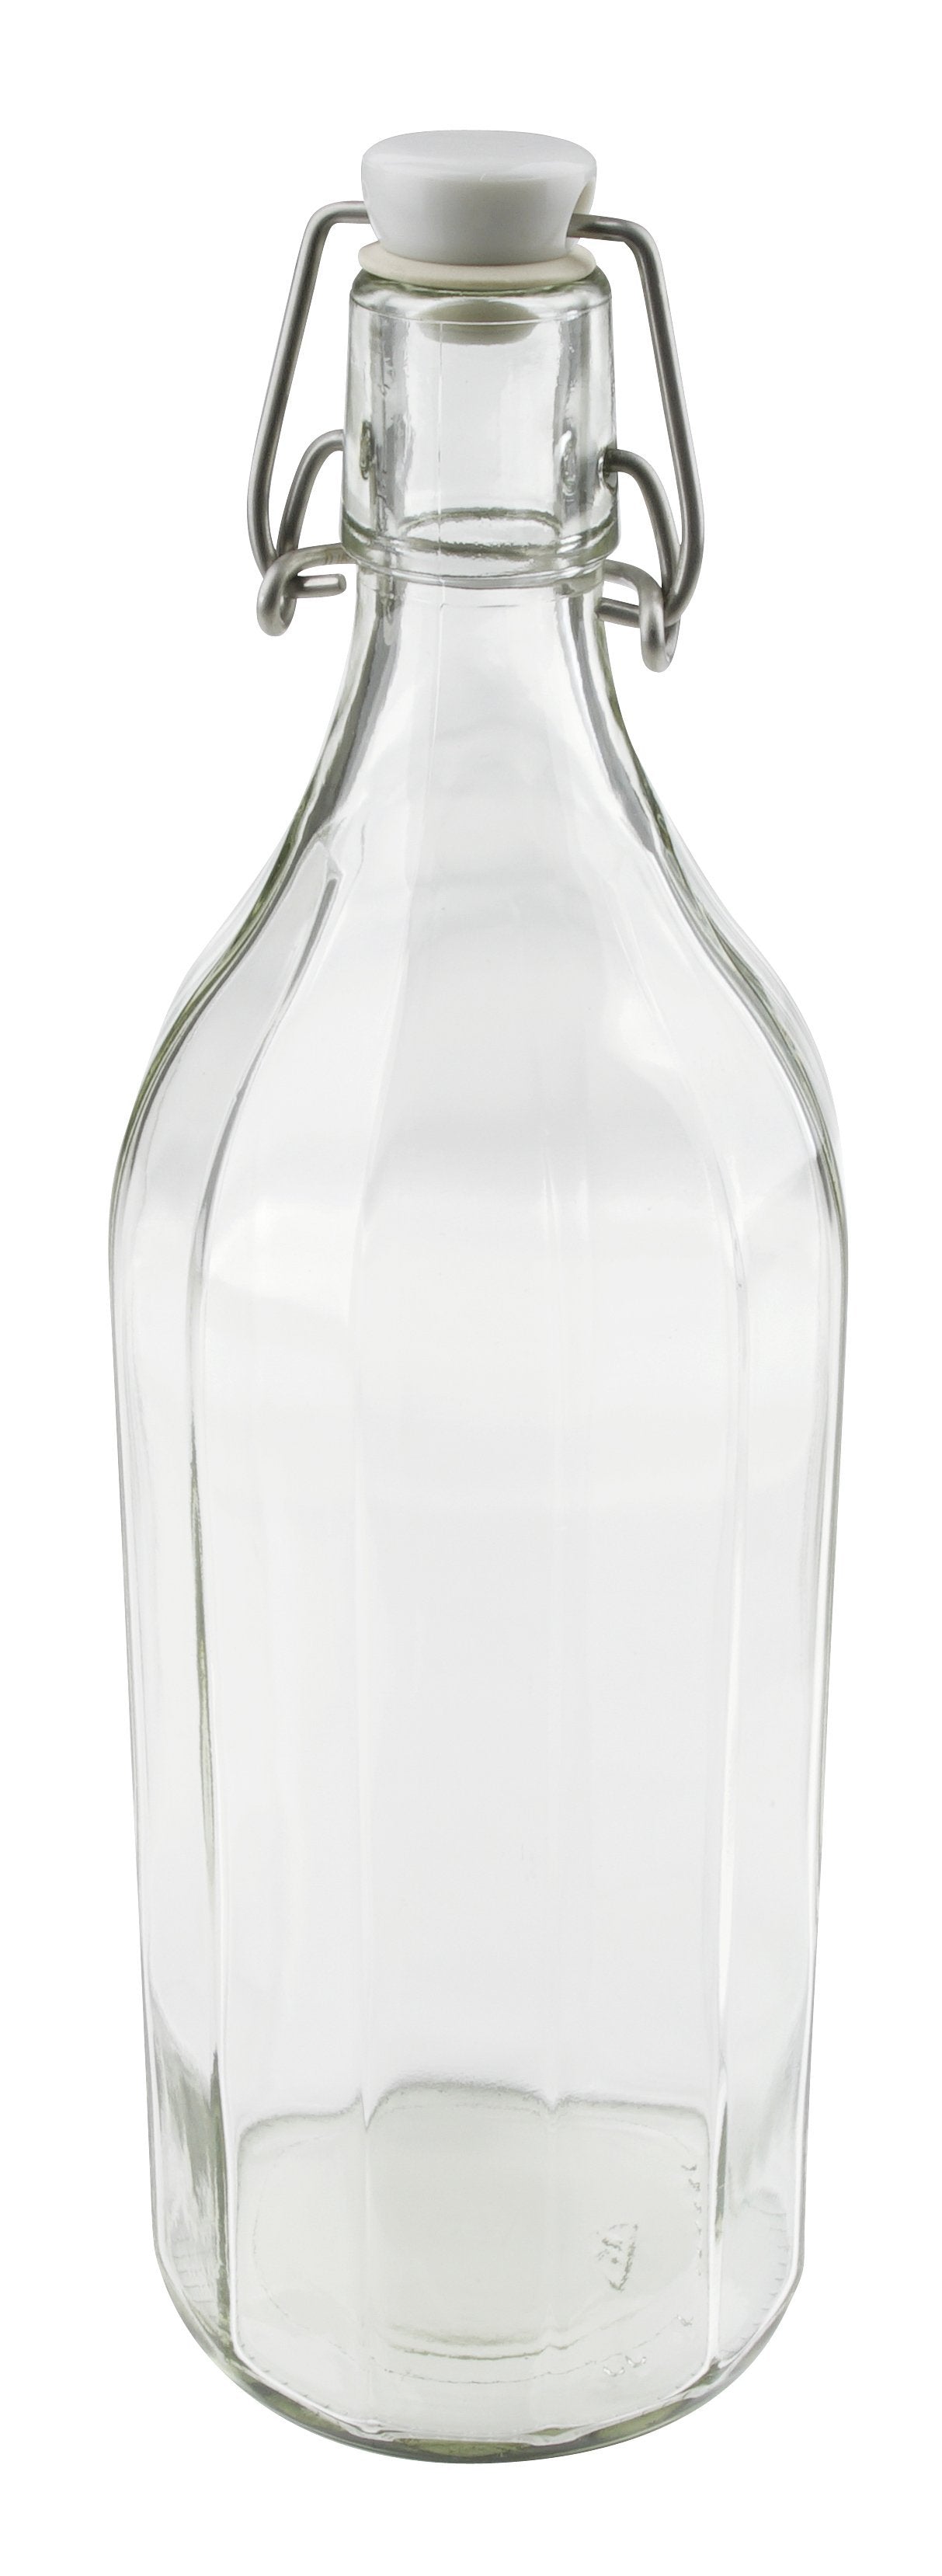 Dr. Oetker Swing Top Bottle With Edge Design 1000 Ml - Whole and All